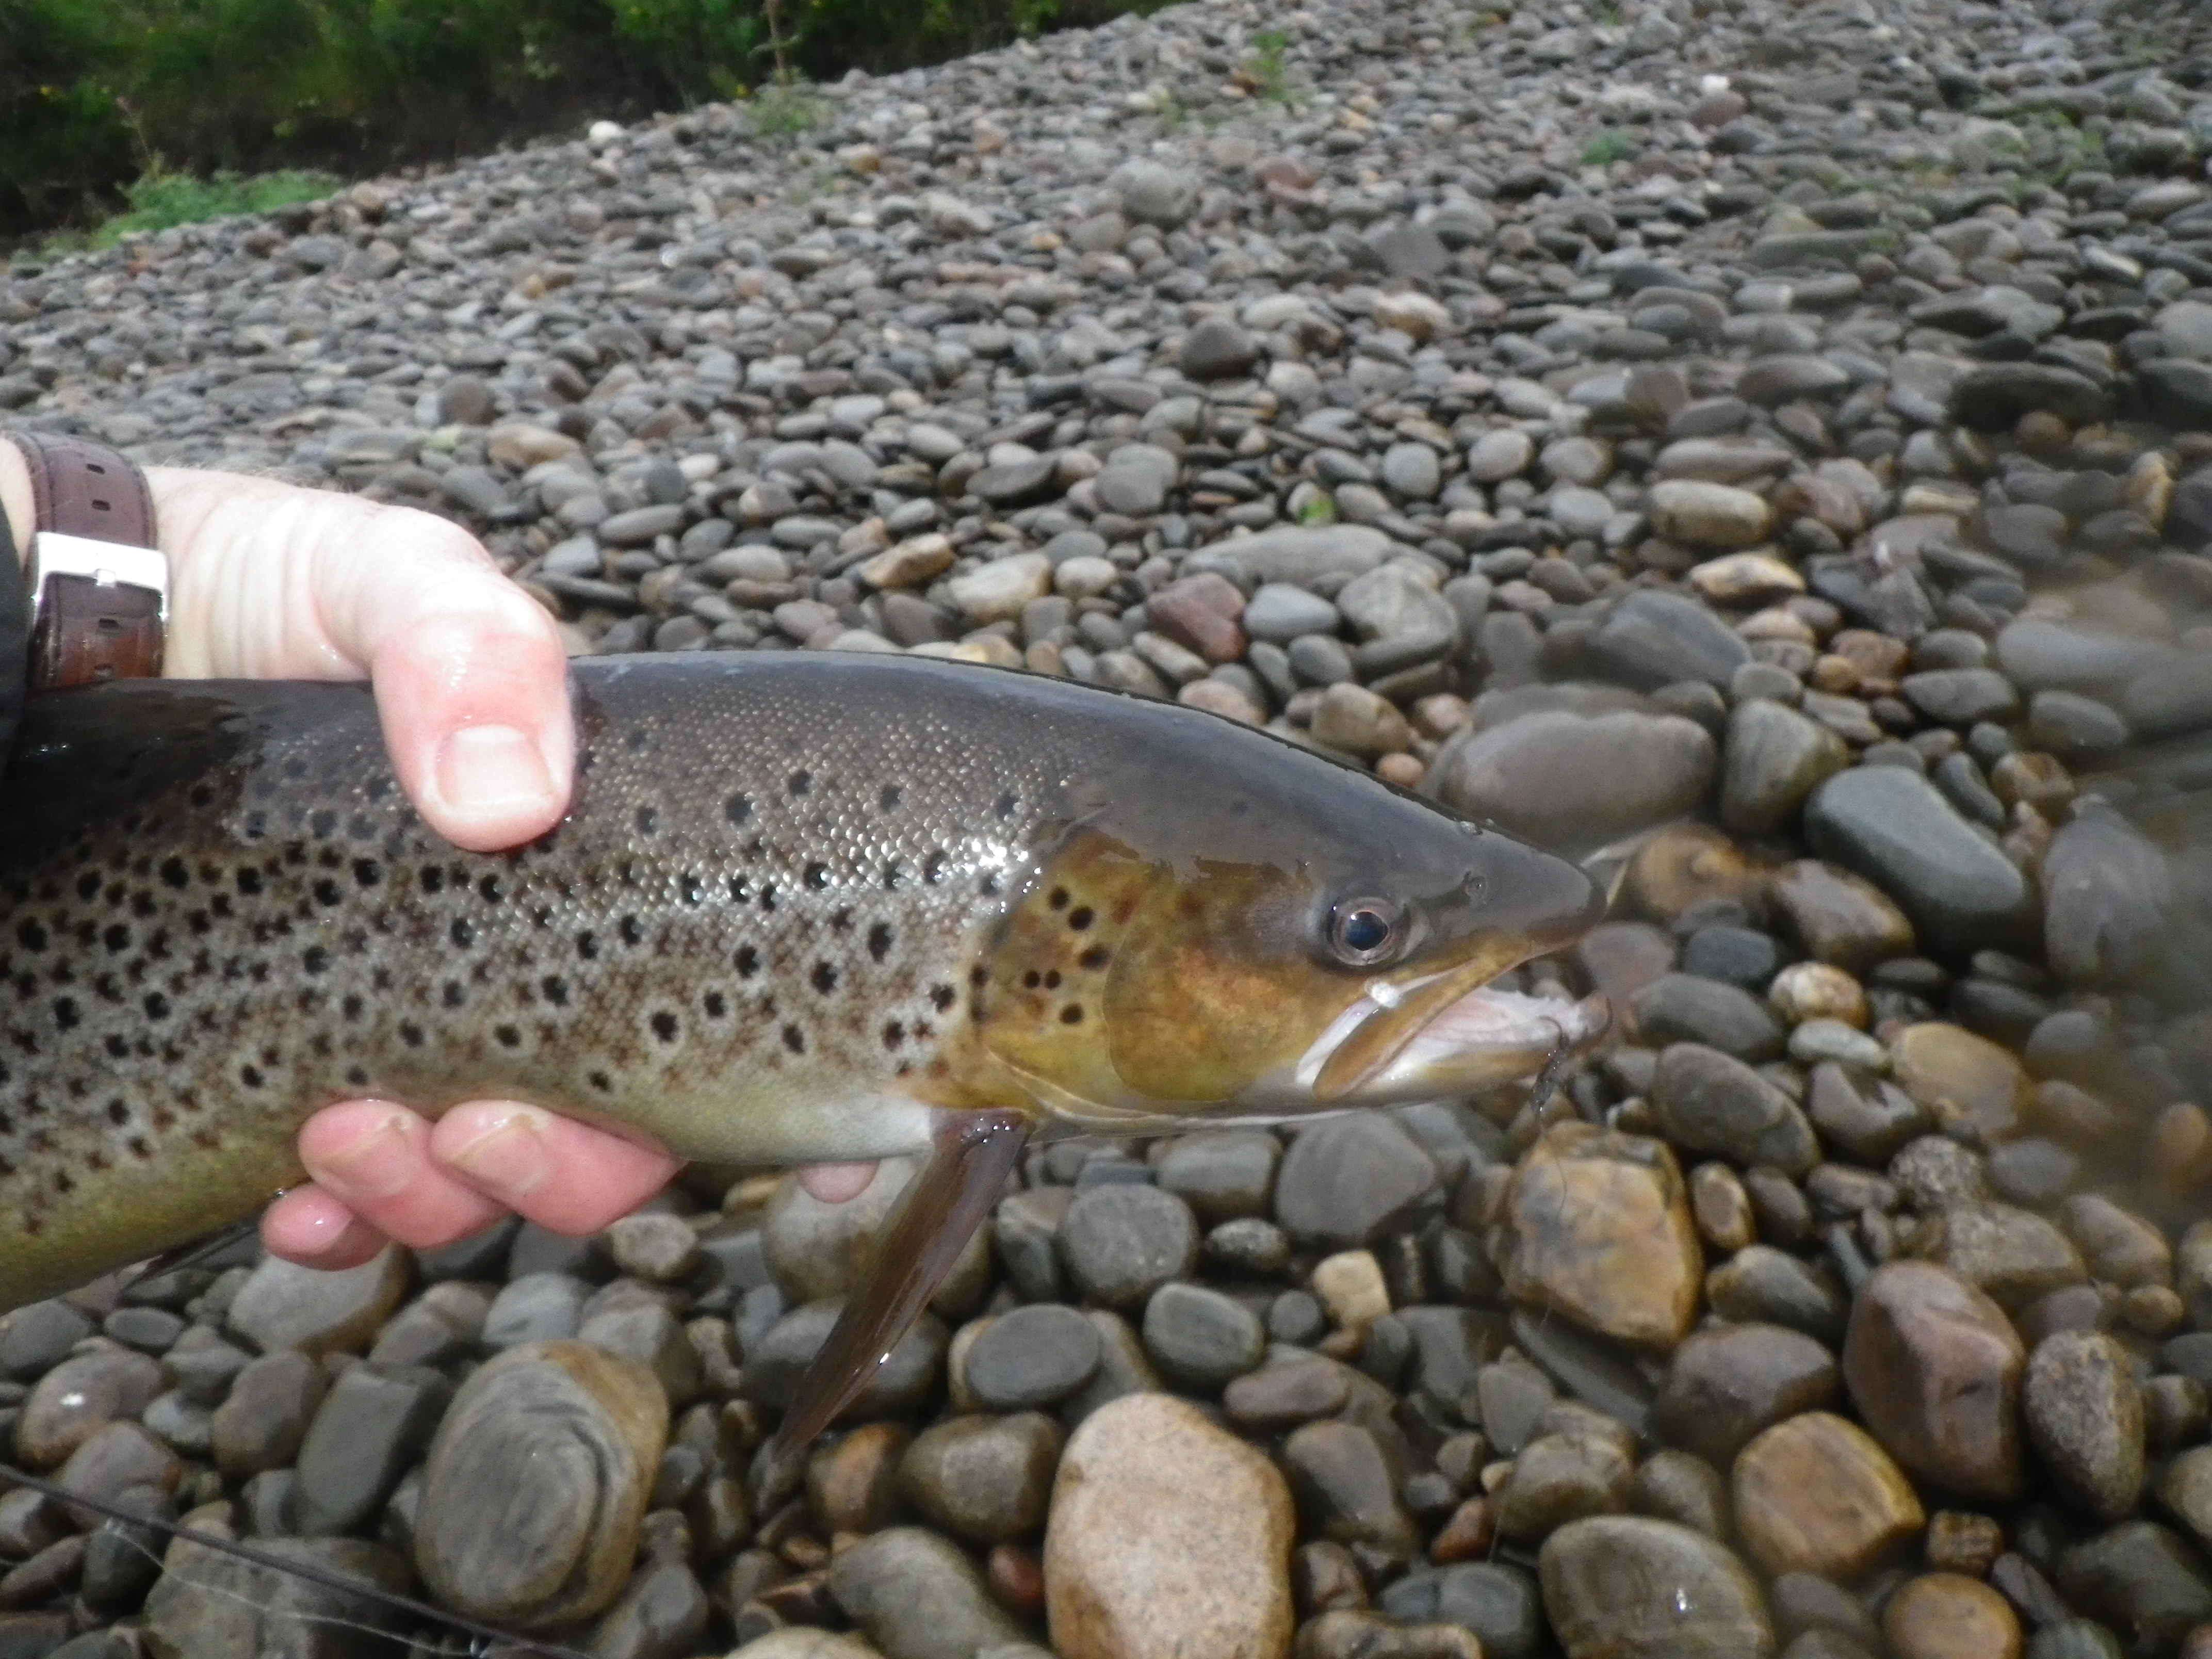 Dave Downie Fishing Experienced